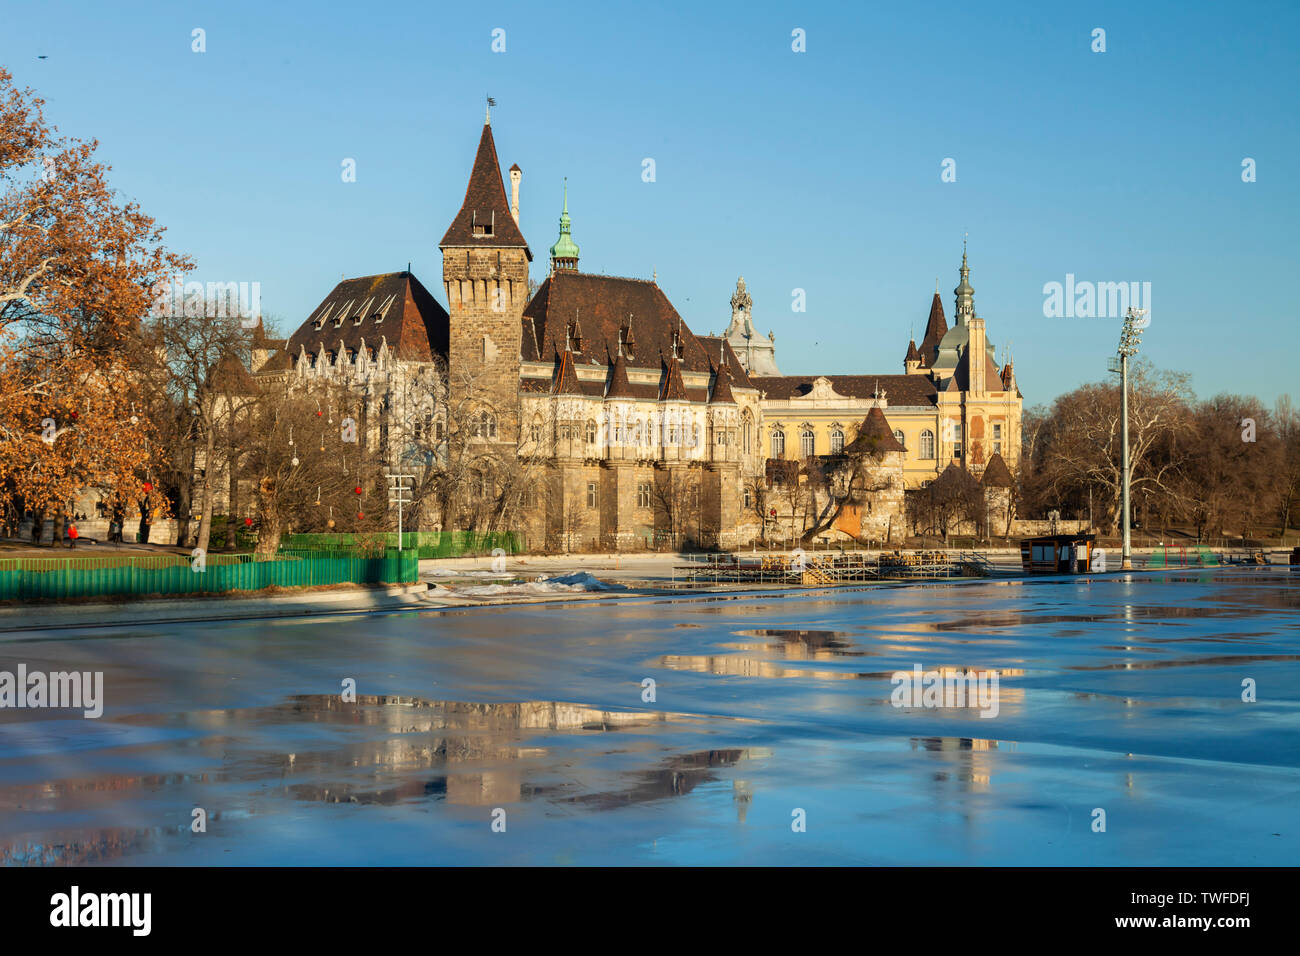 Vajdahunyad Castle and City Ice Rink in Budapest. Stock Photo